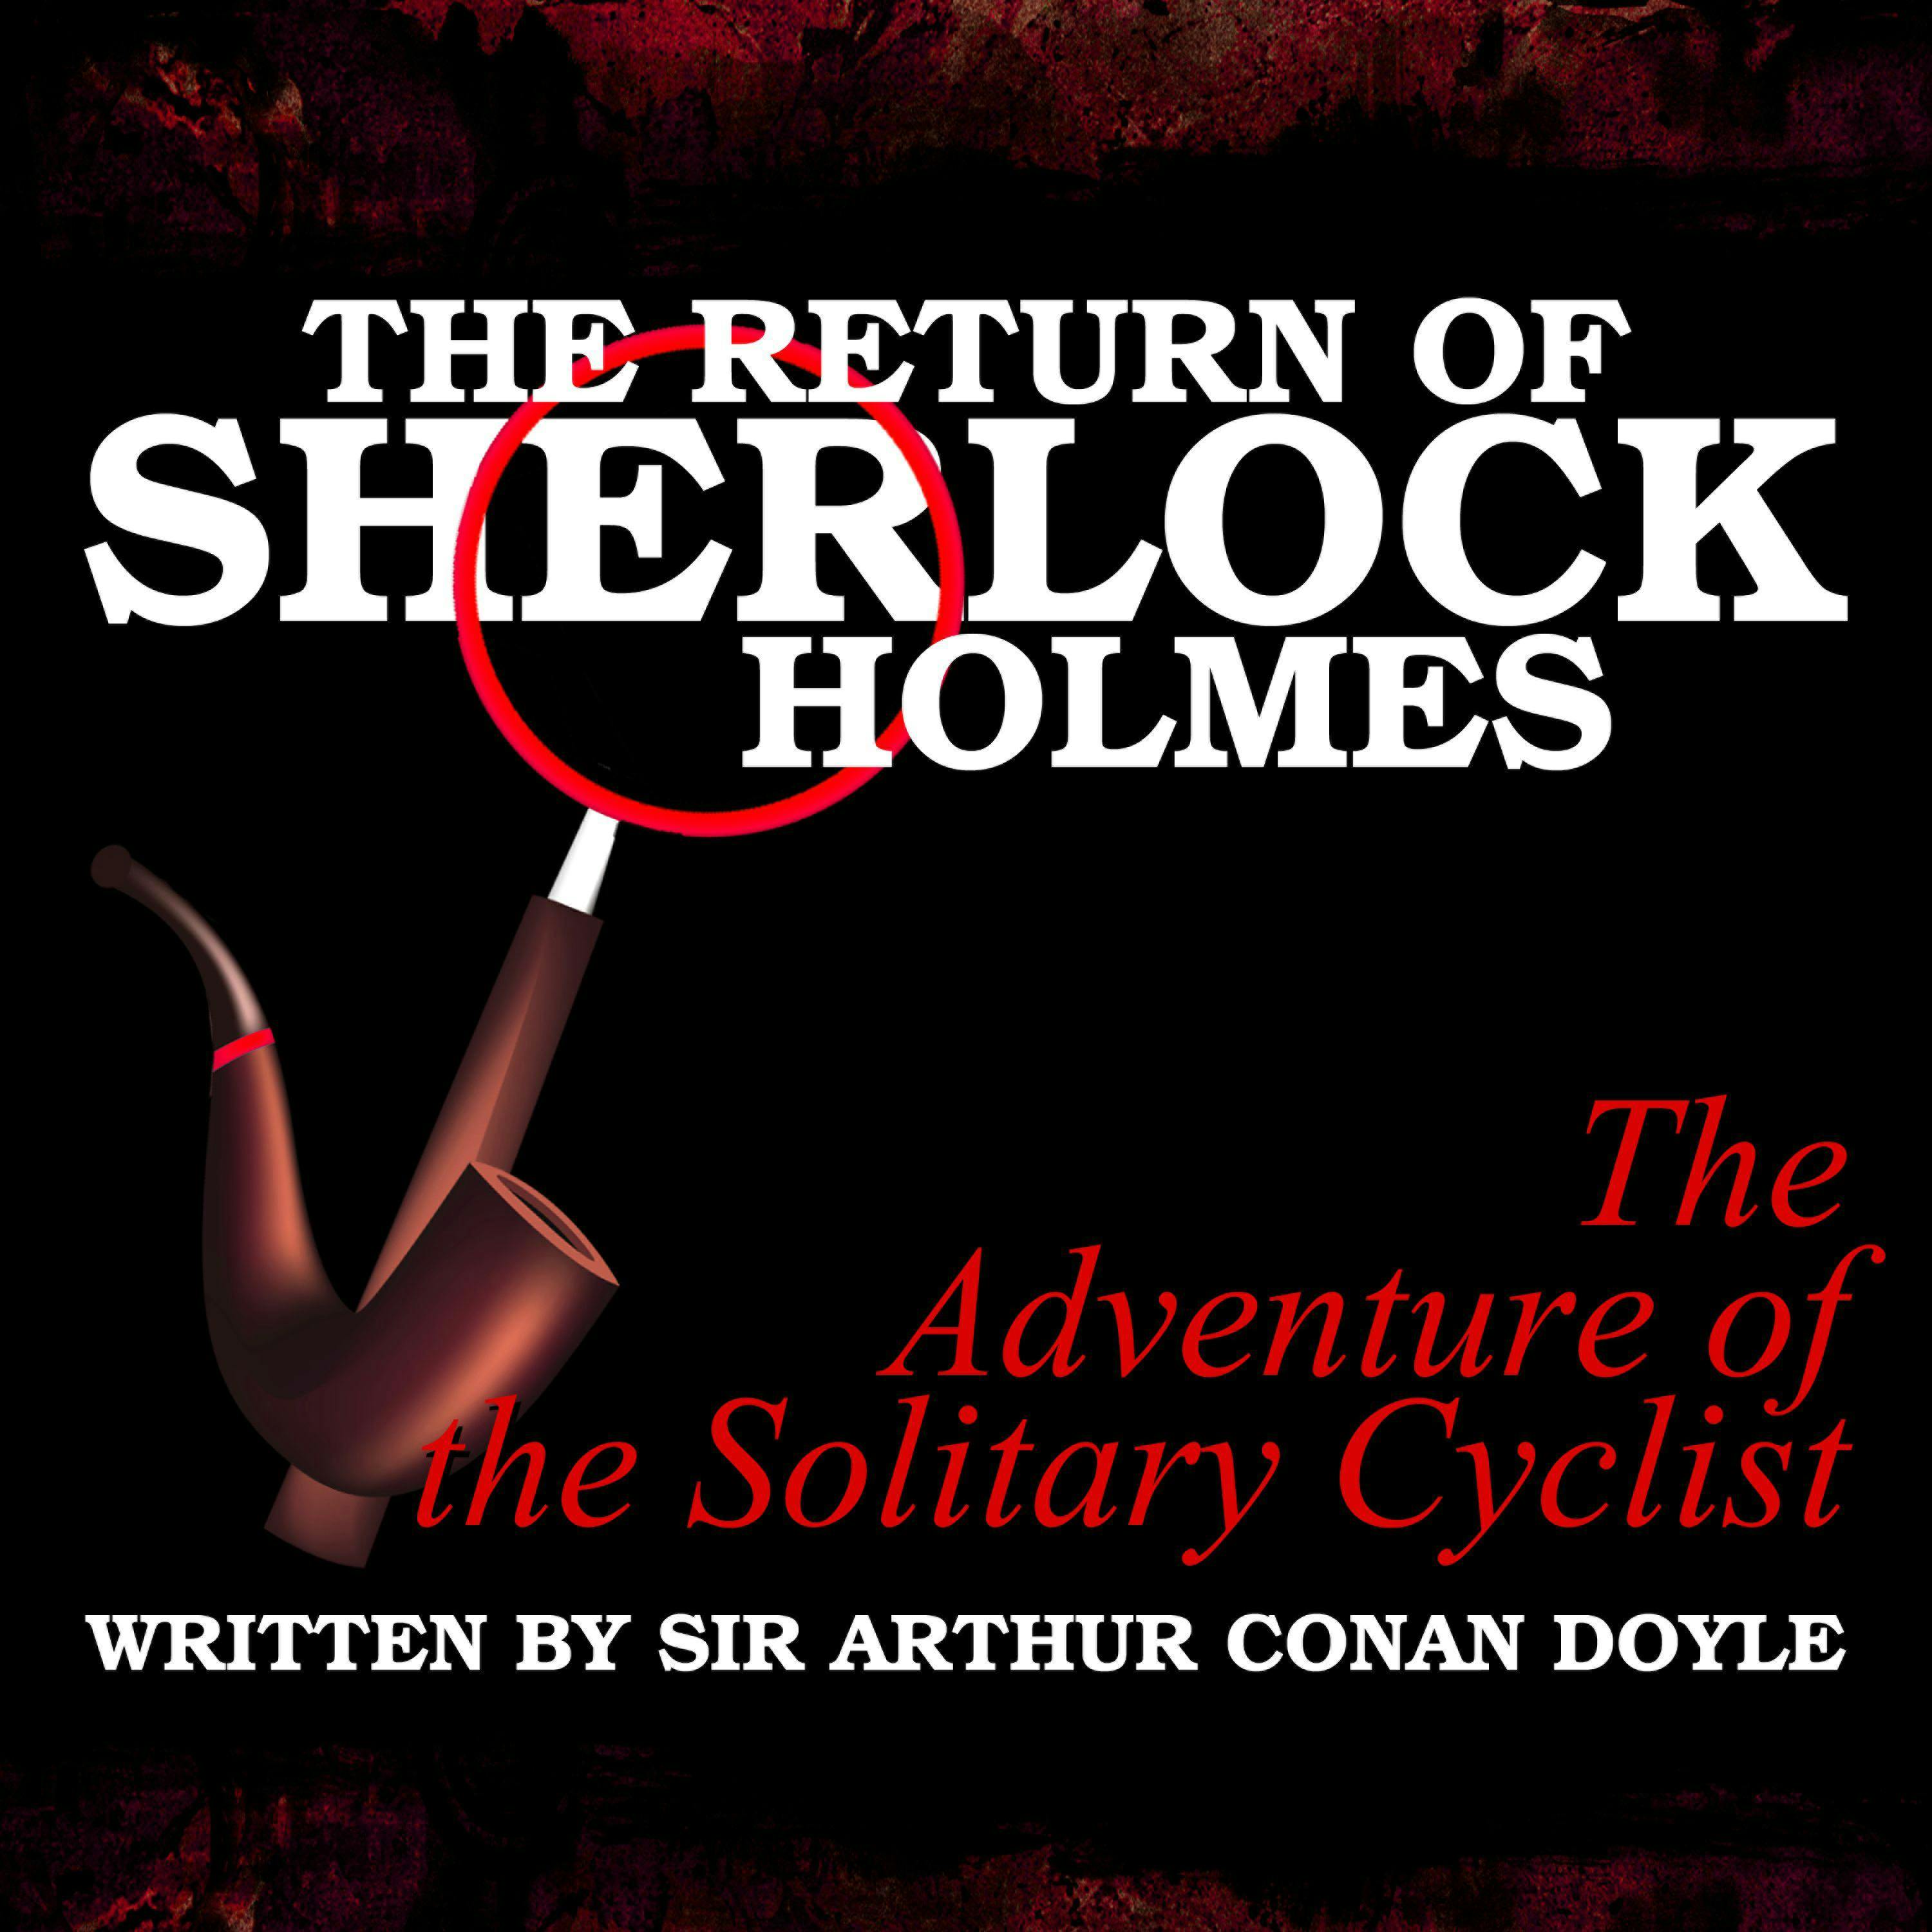 The Return of Sherlock Holmes: The Adventure of the Solitary Cyclist - undefined